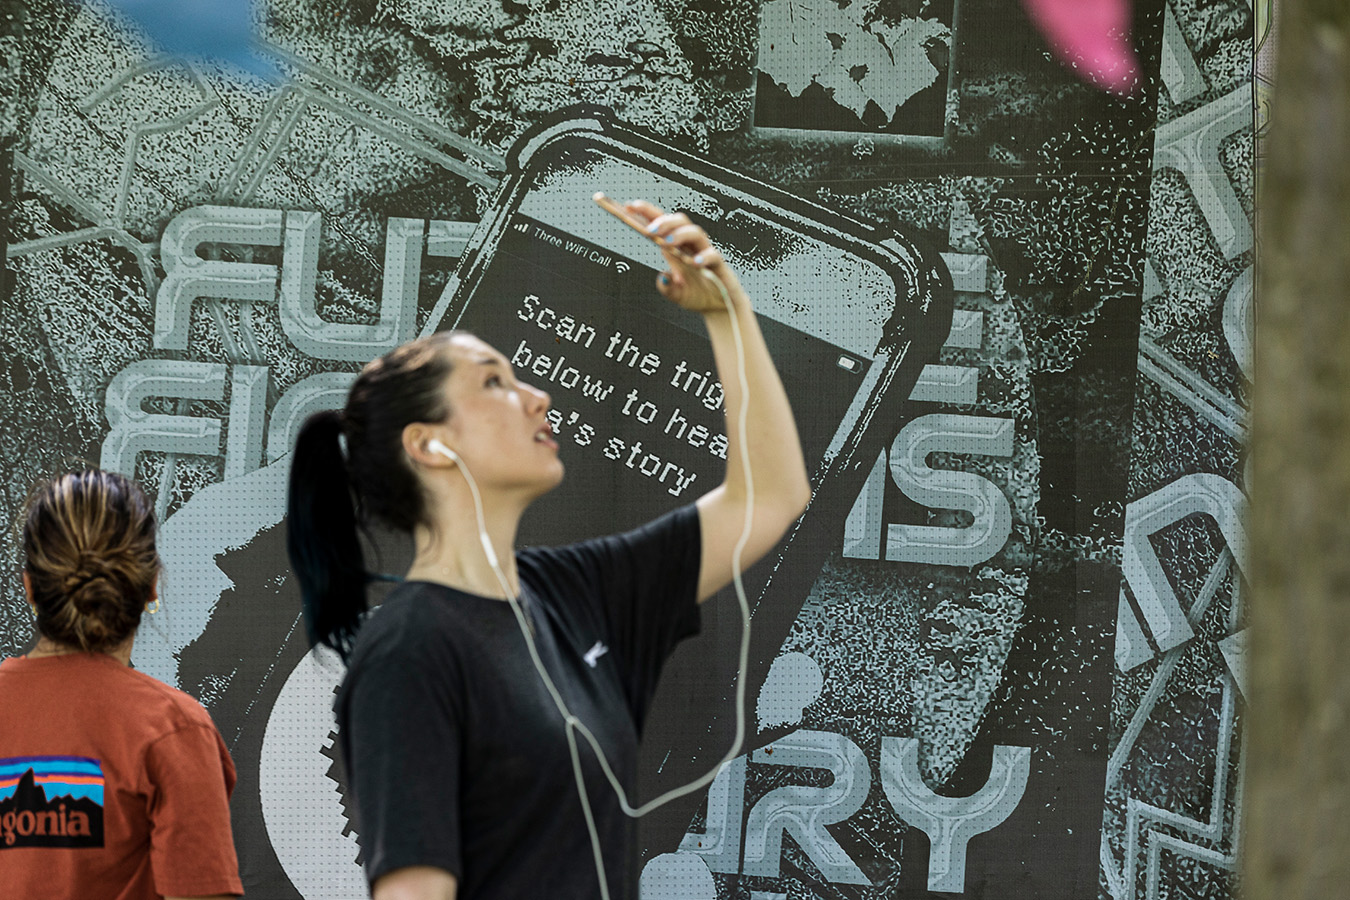 woman holding up her phone, standing in front a future fictions sign